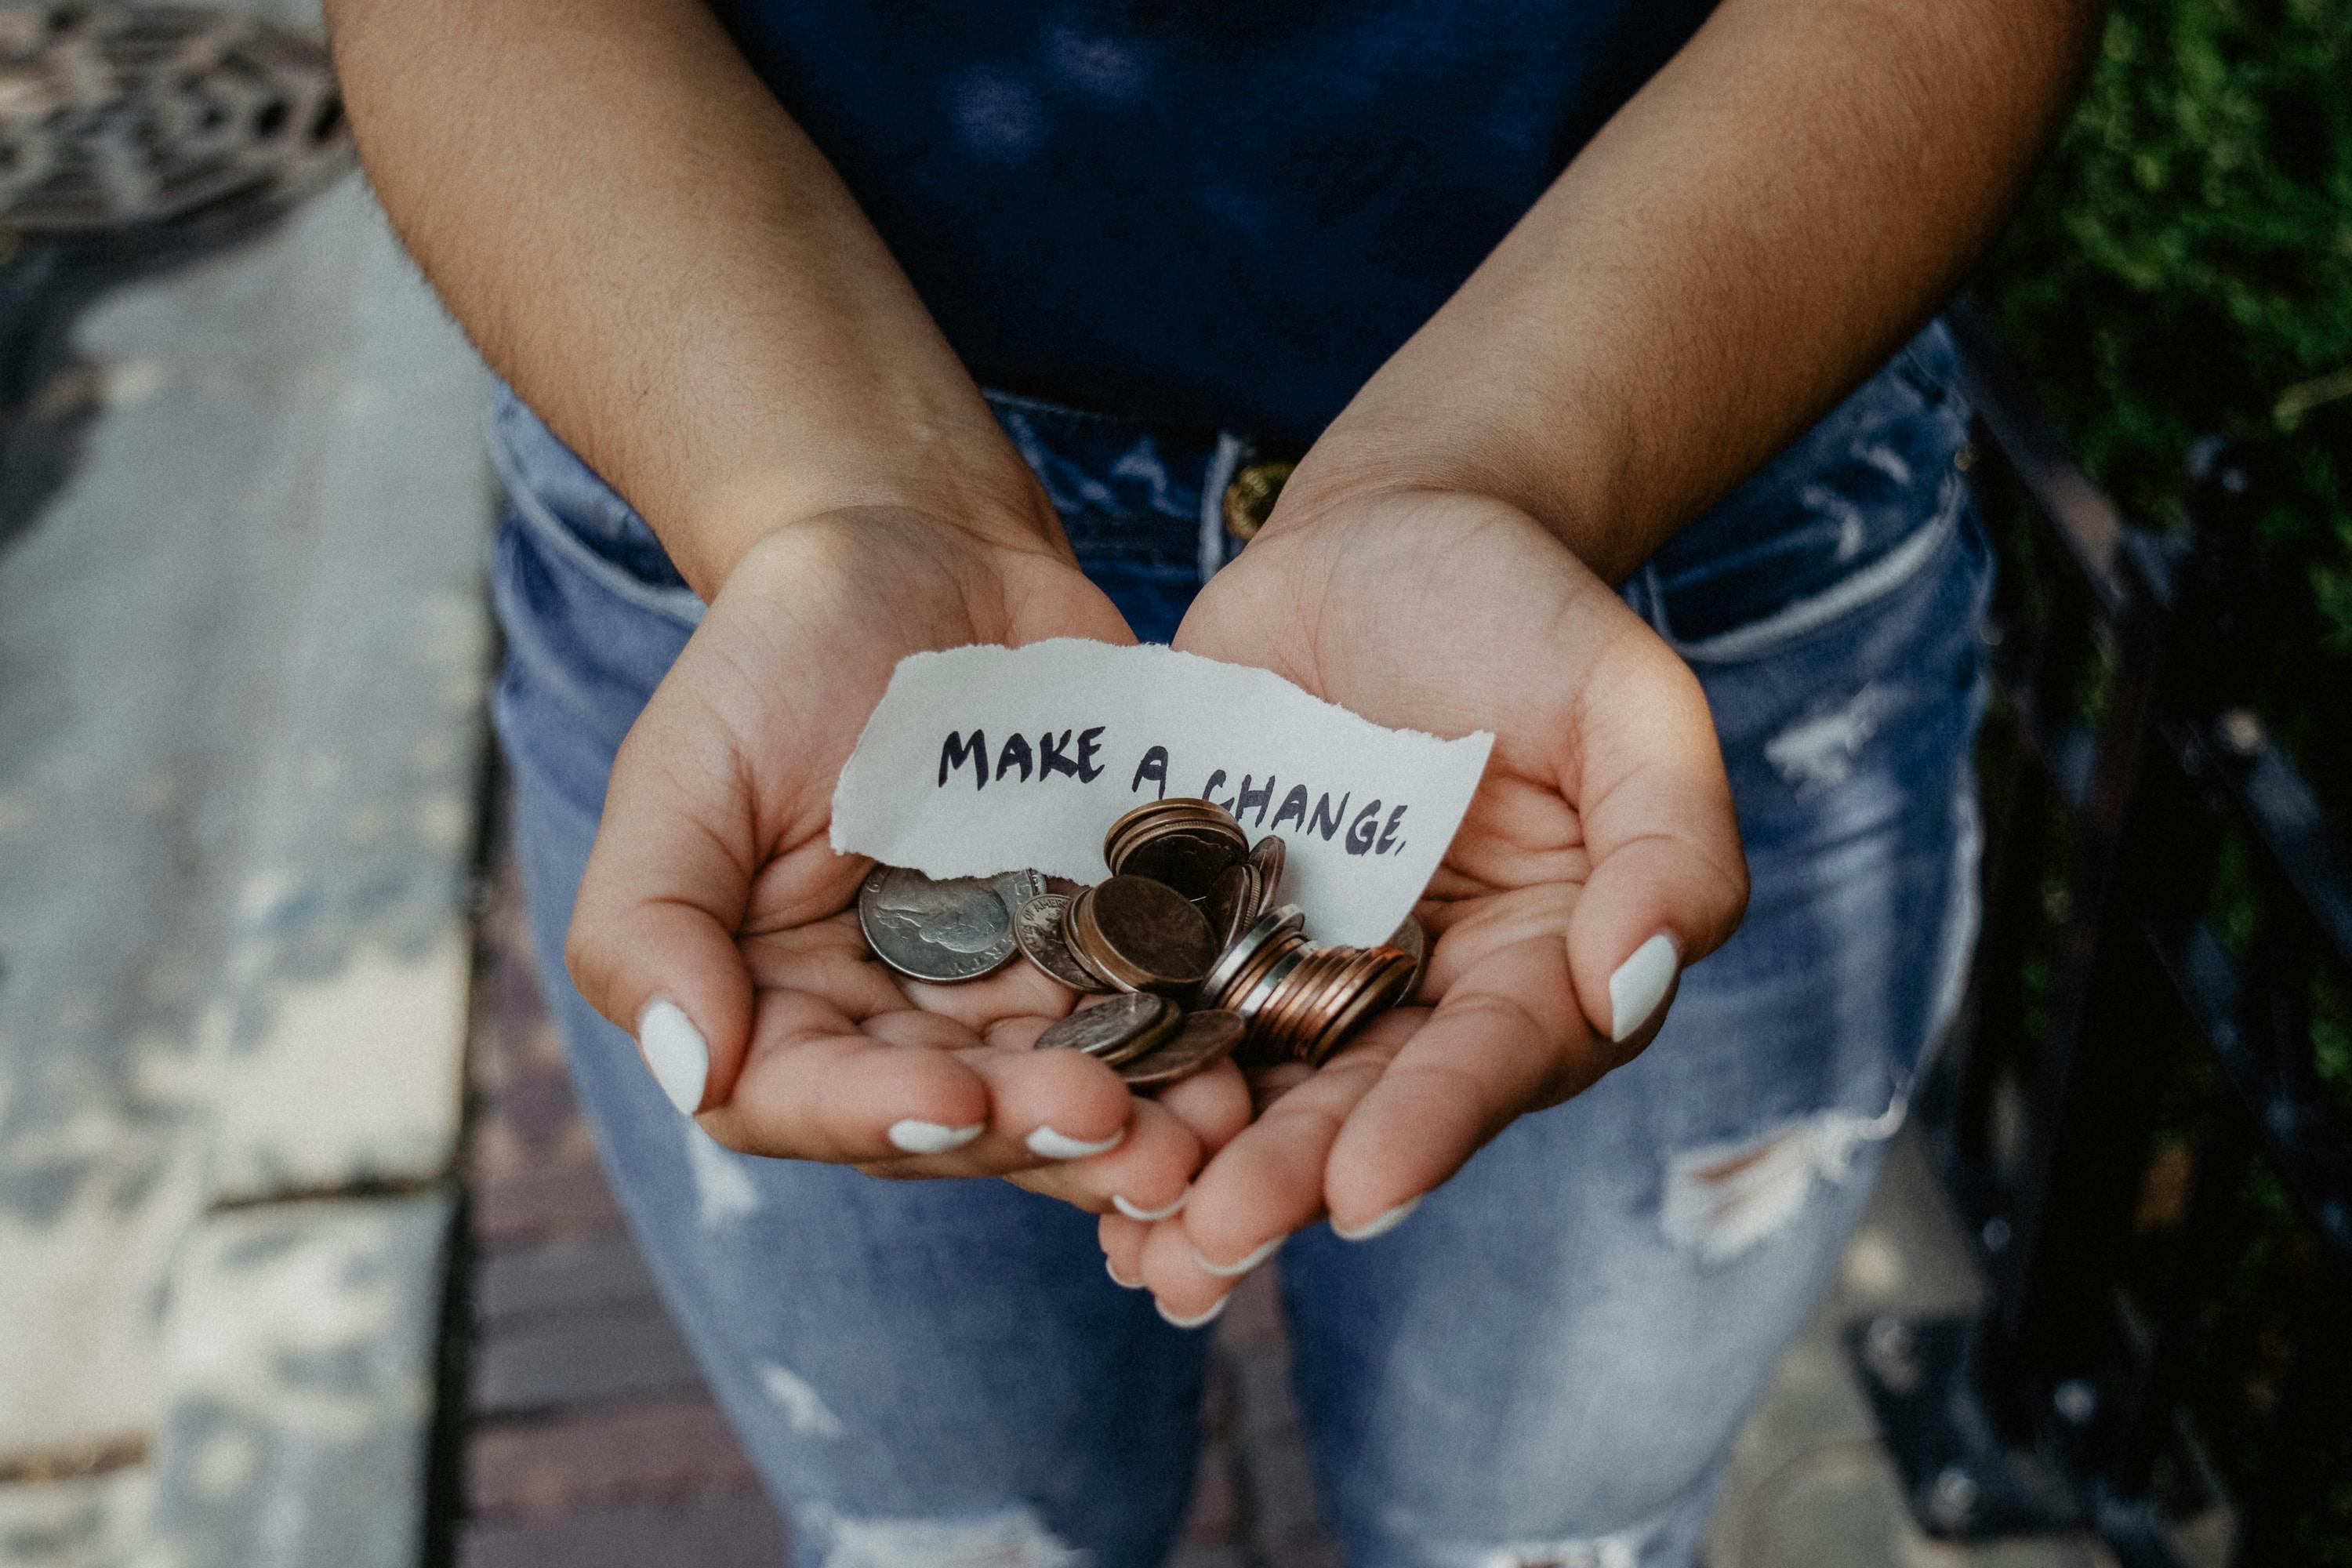 An image of a person holding a handful of coins out to you, along with a note that says "Make a Change".